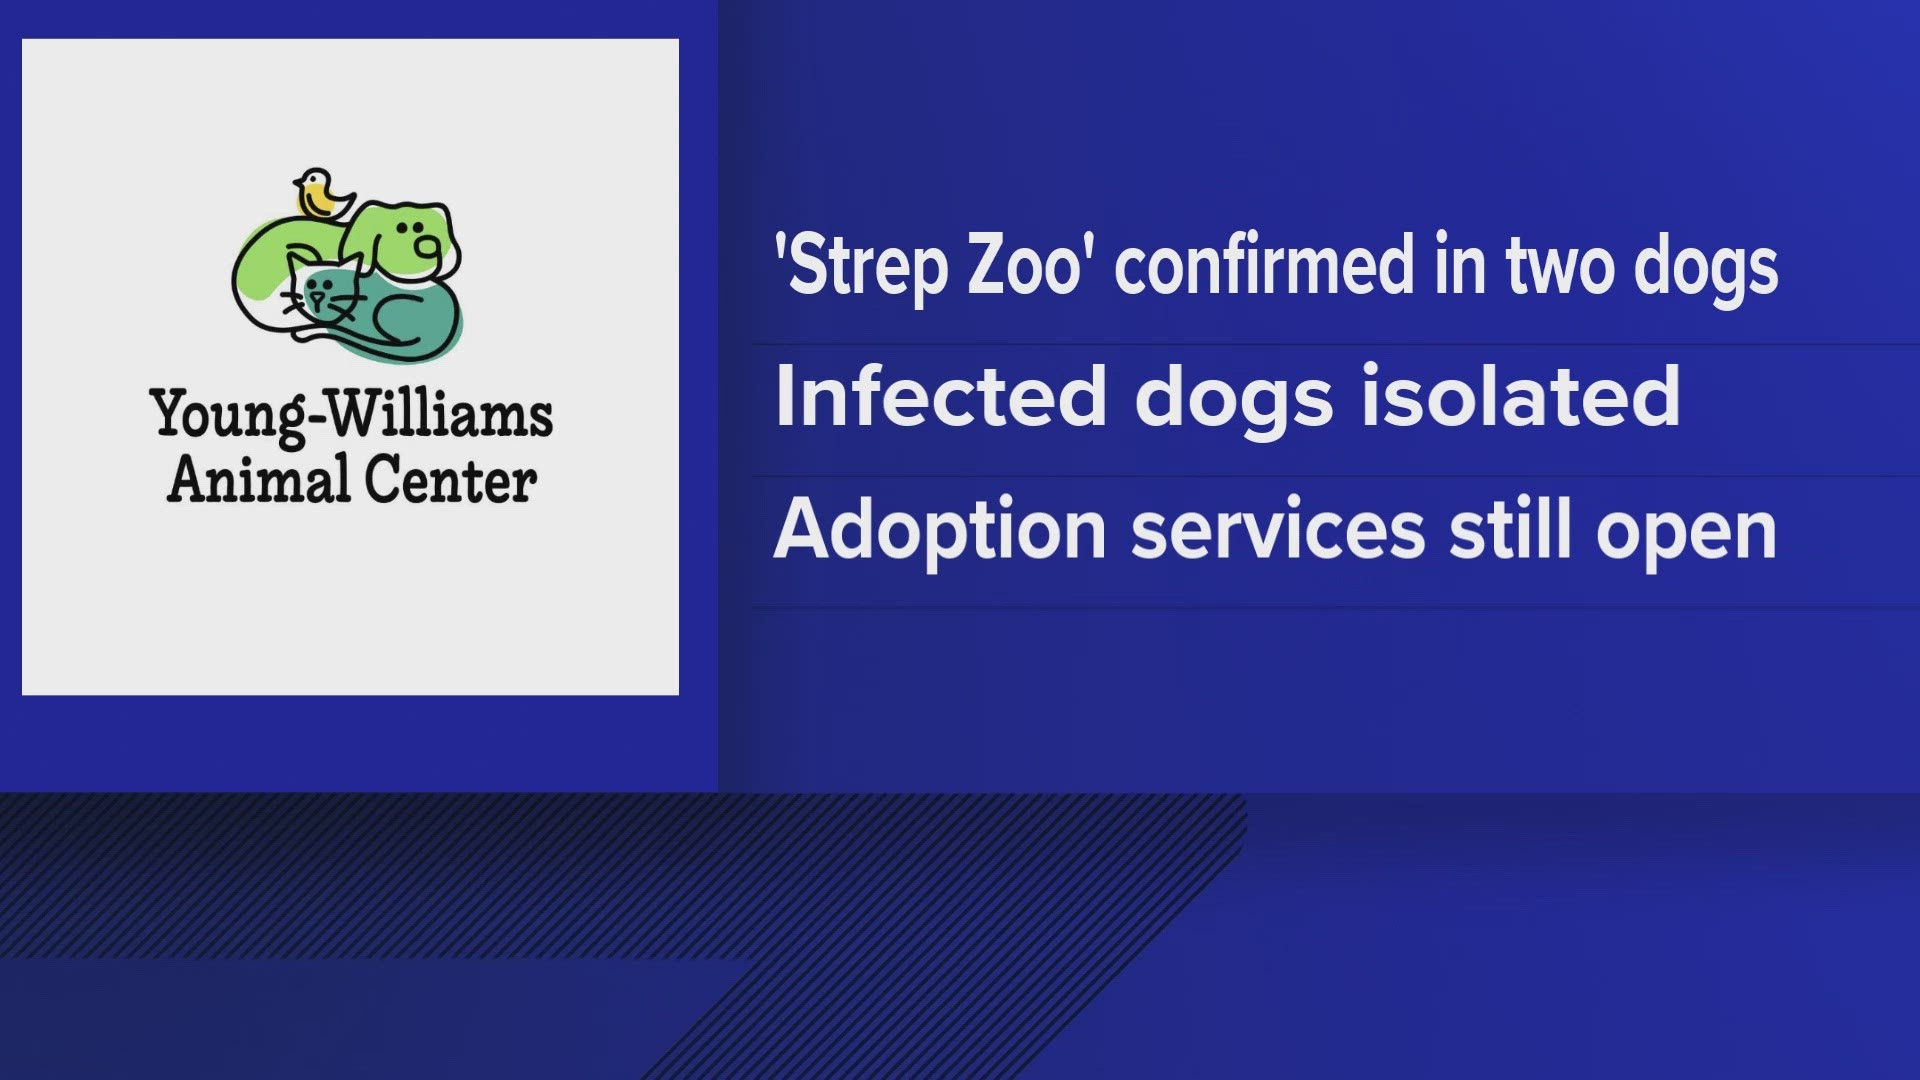 Two dogs have tested positive for strep zoo and are recovering, according to Young-Williams.